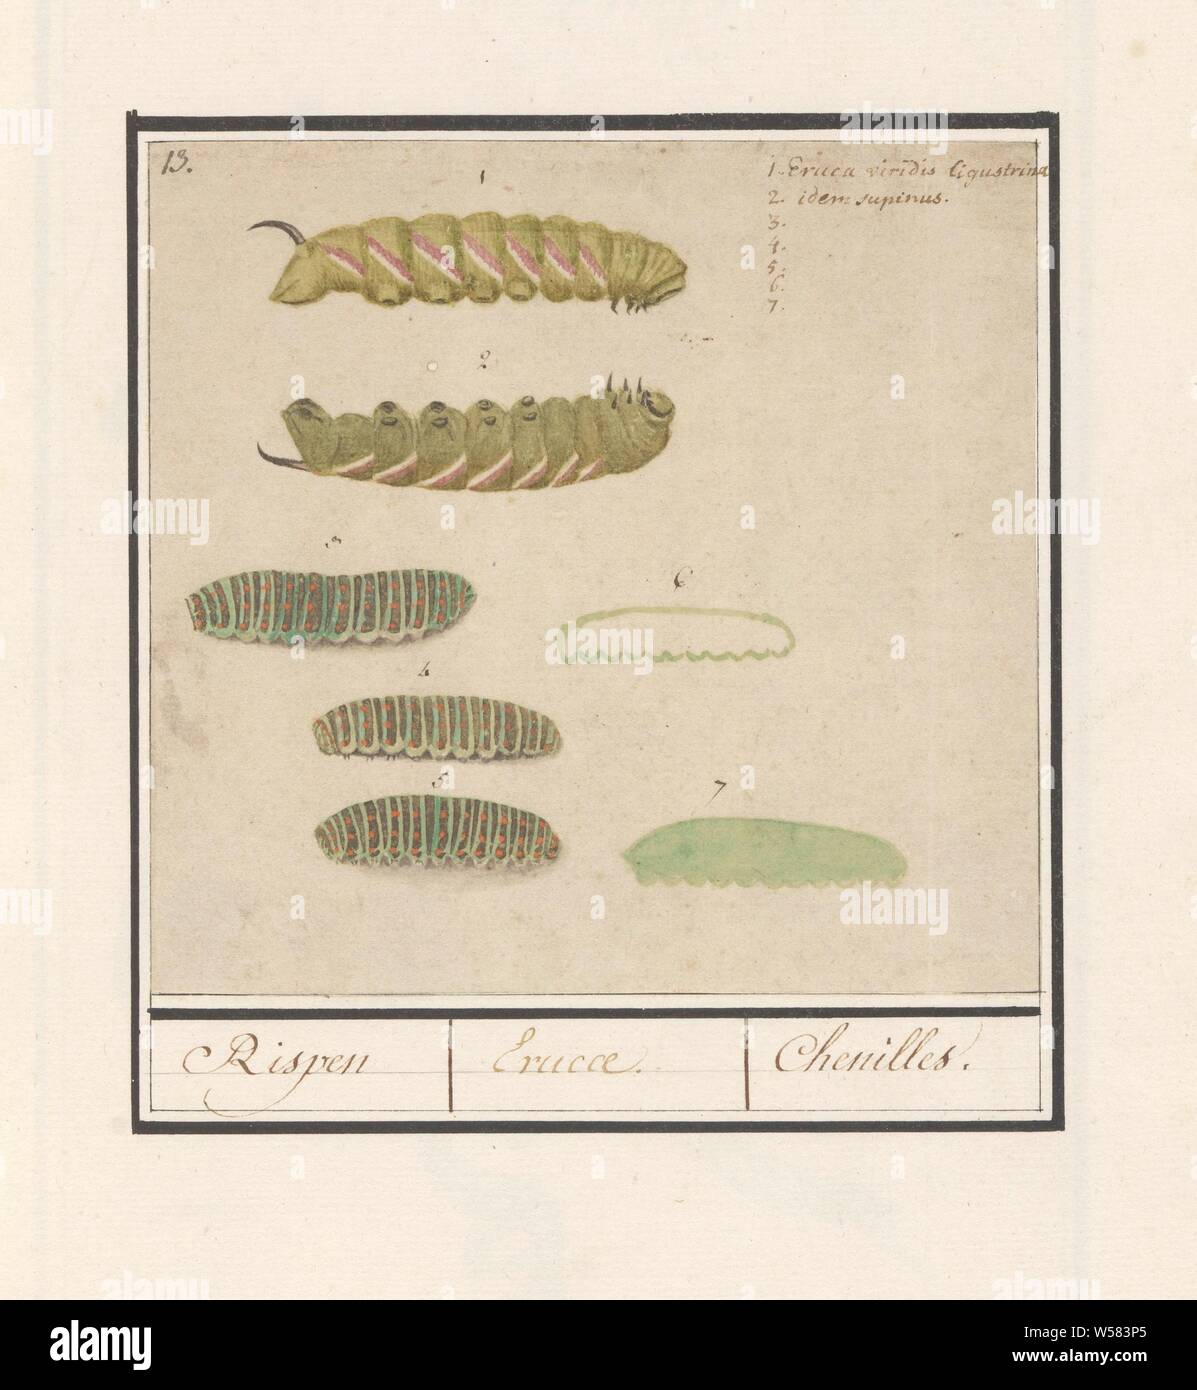 Caterpillars, Rispen / Erucae. / Chenilles (title on object), Leaf with different caterpillars, numbered 1-7. Top right two names in Latin. Numbered top left: 13. Part of the sixth album with drawings of fish, shells and insects. Sixth of twelve albums with drawings of animals, birds and plants known around 1600, commissioned by Emperor Rudolf II. With explanations in Dutch, Latin and French, insects: caterpillar, Anselmus Boetius de Boodt, Praag, 1596 - 1610, paper, pencil, chalk, watercolor (paint), deck paint, ink, pen, h 146 mm × w 152 mm Stock Photo